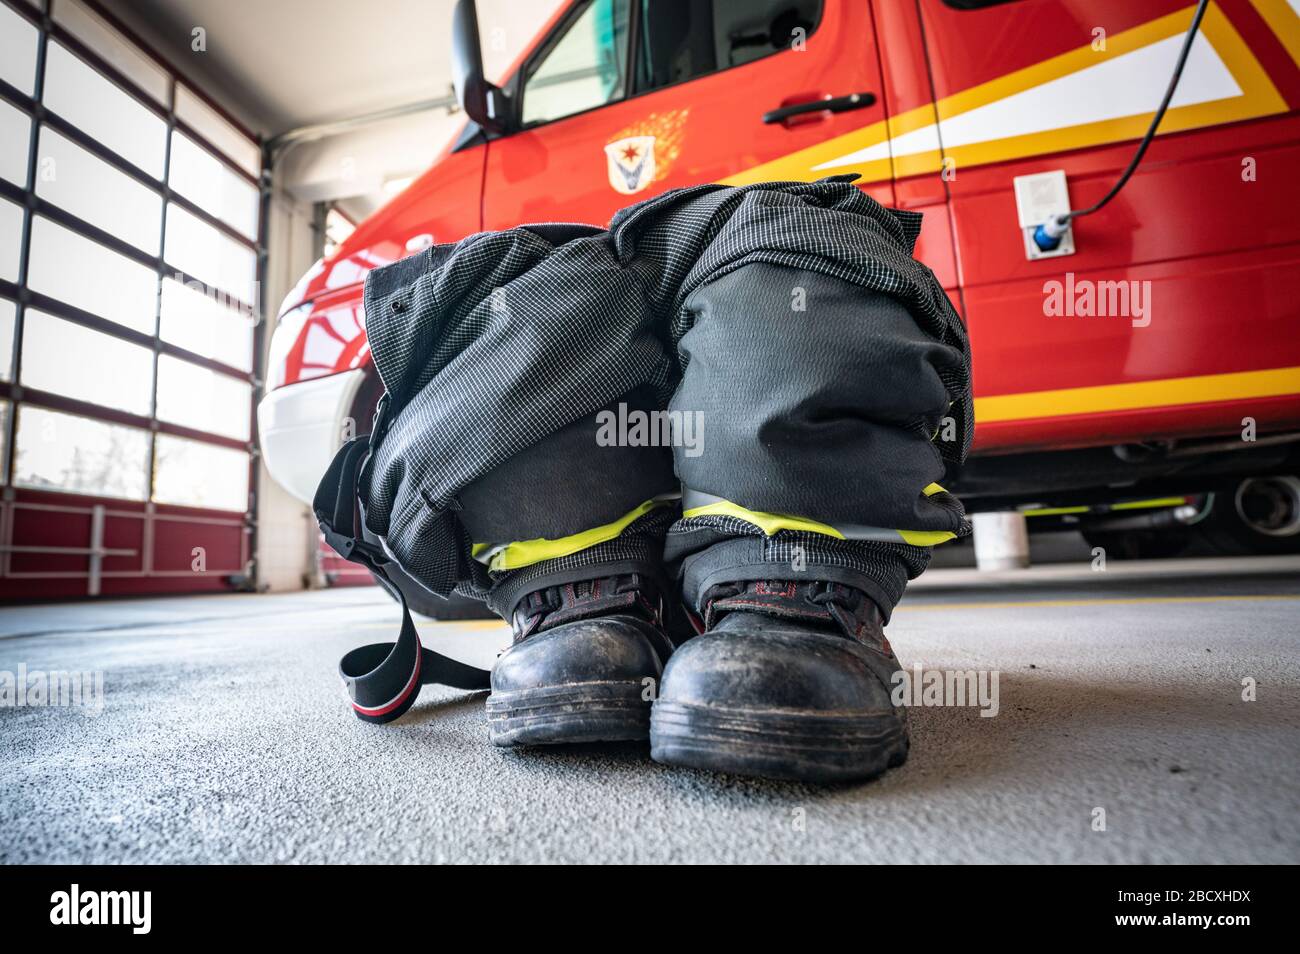 fire station shoes